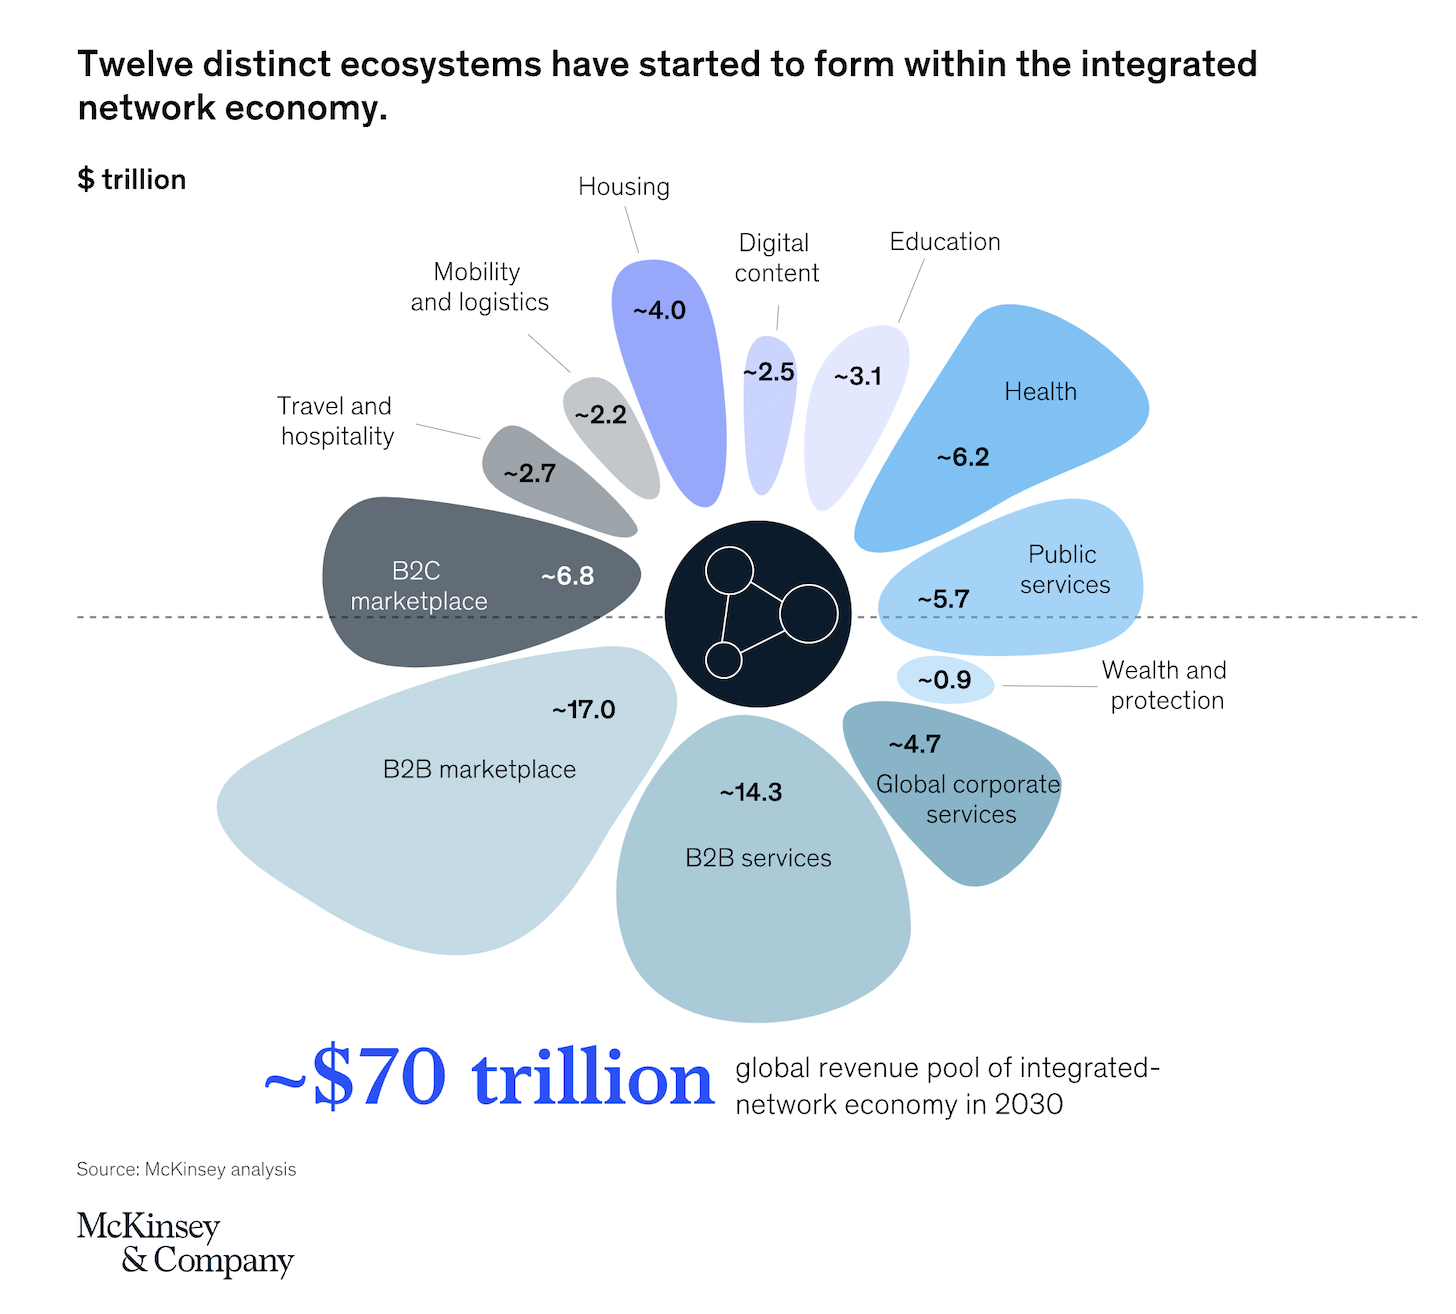 $70 trillion of ecosystems in the global integrated network economy (McKinsey)